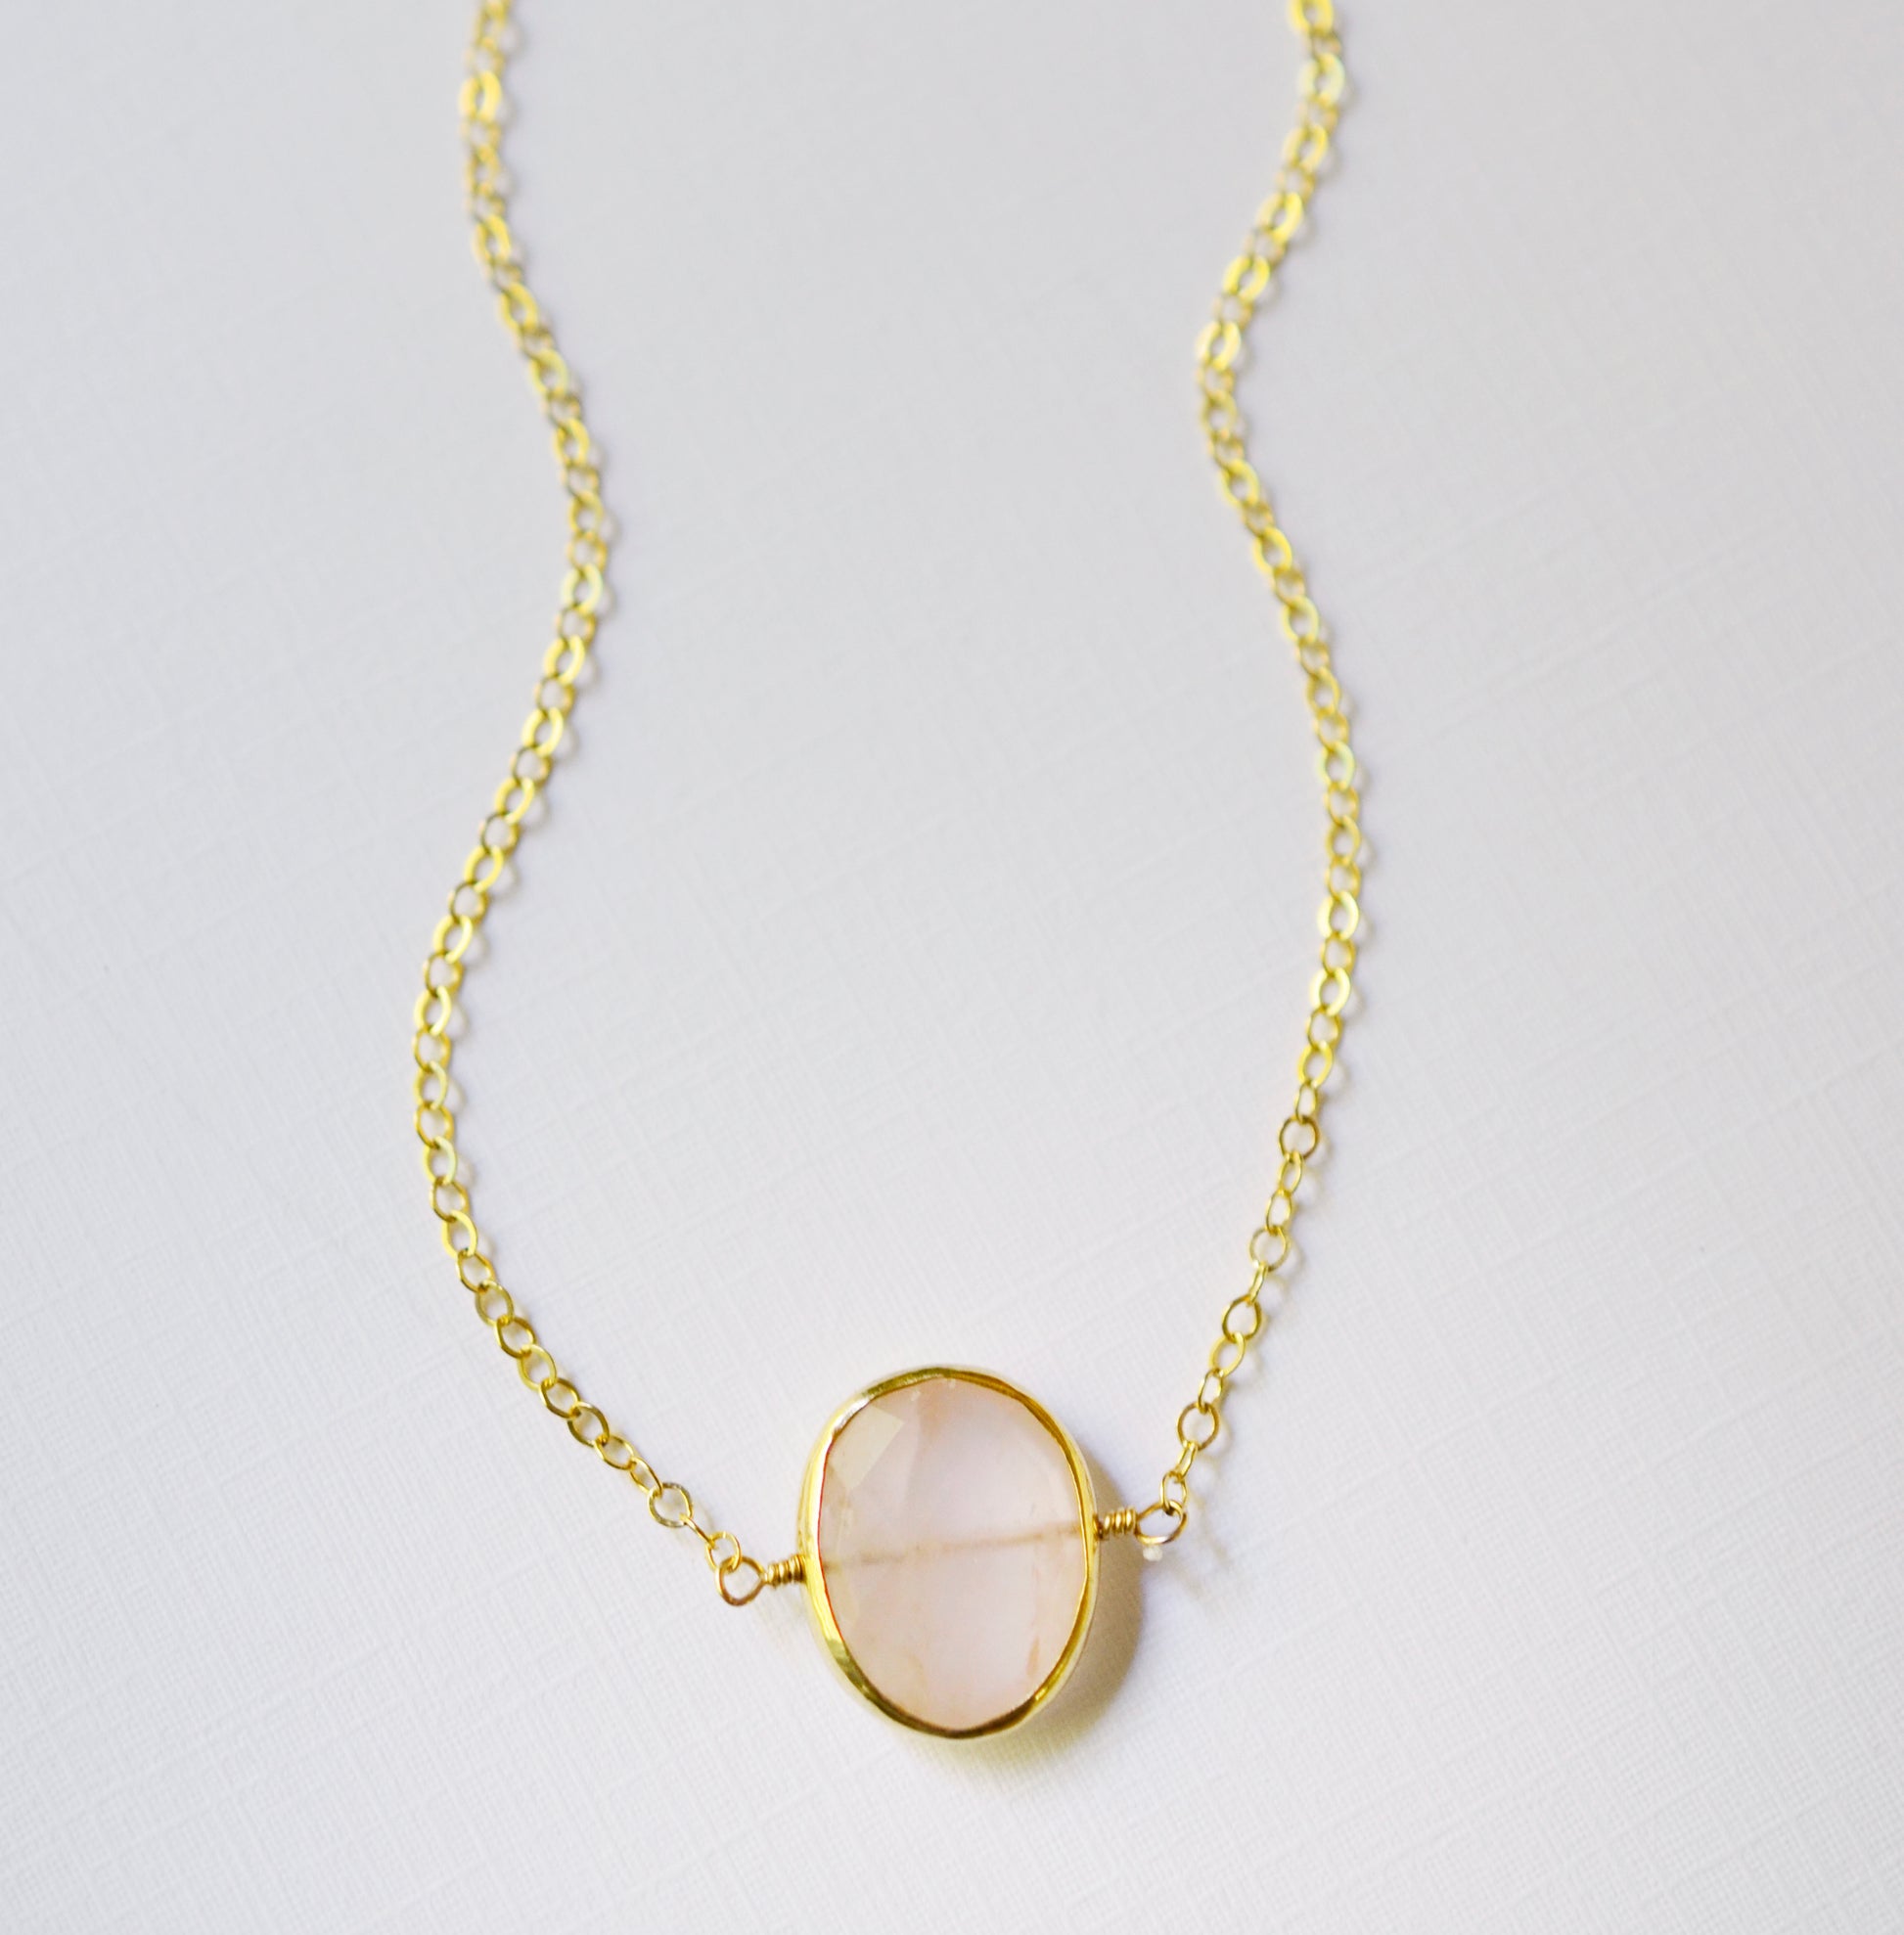 Dainty pink Rose Quartz oval coin shaped pendant with gold bezel. Chain is 14k Gold Filled.